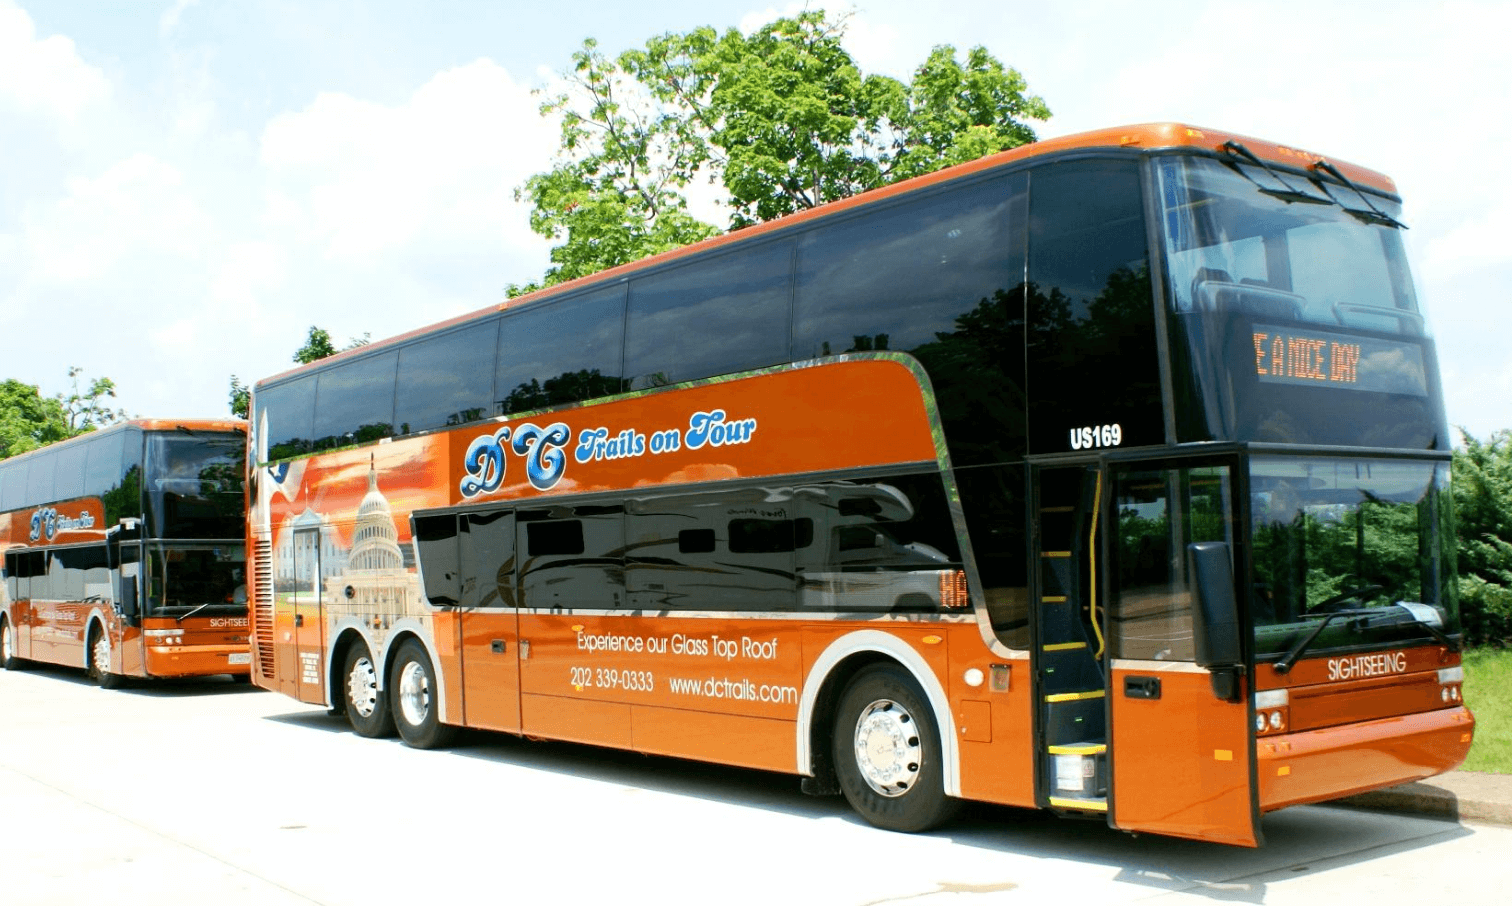 bus tour companies in the united states